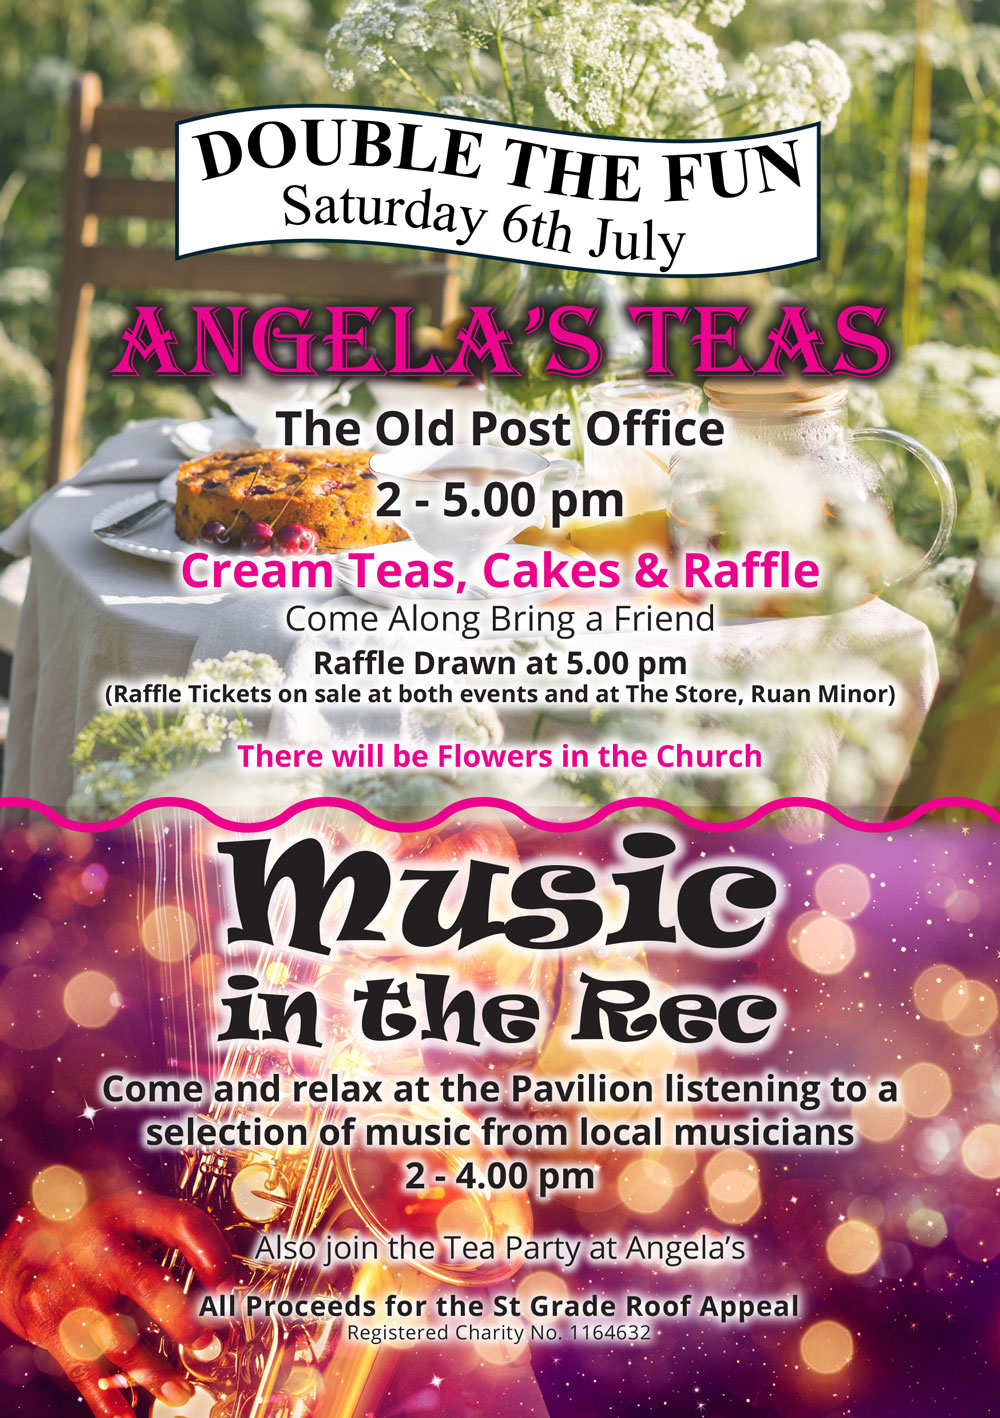 Angela's Teas and Music in the Rec